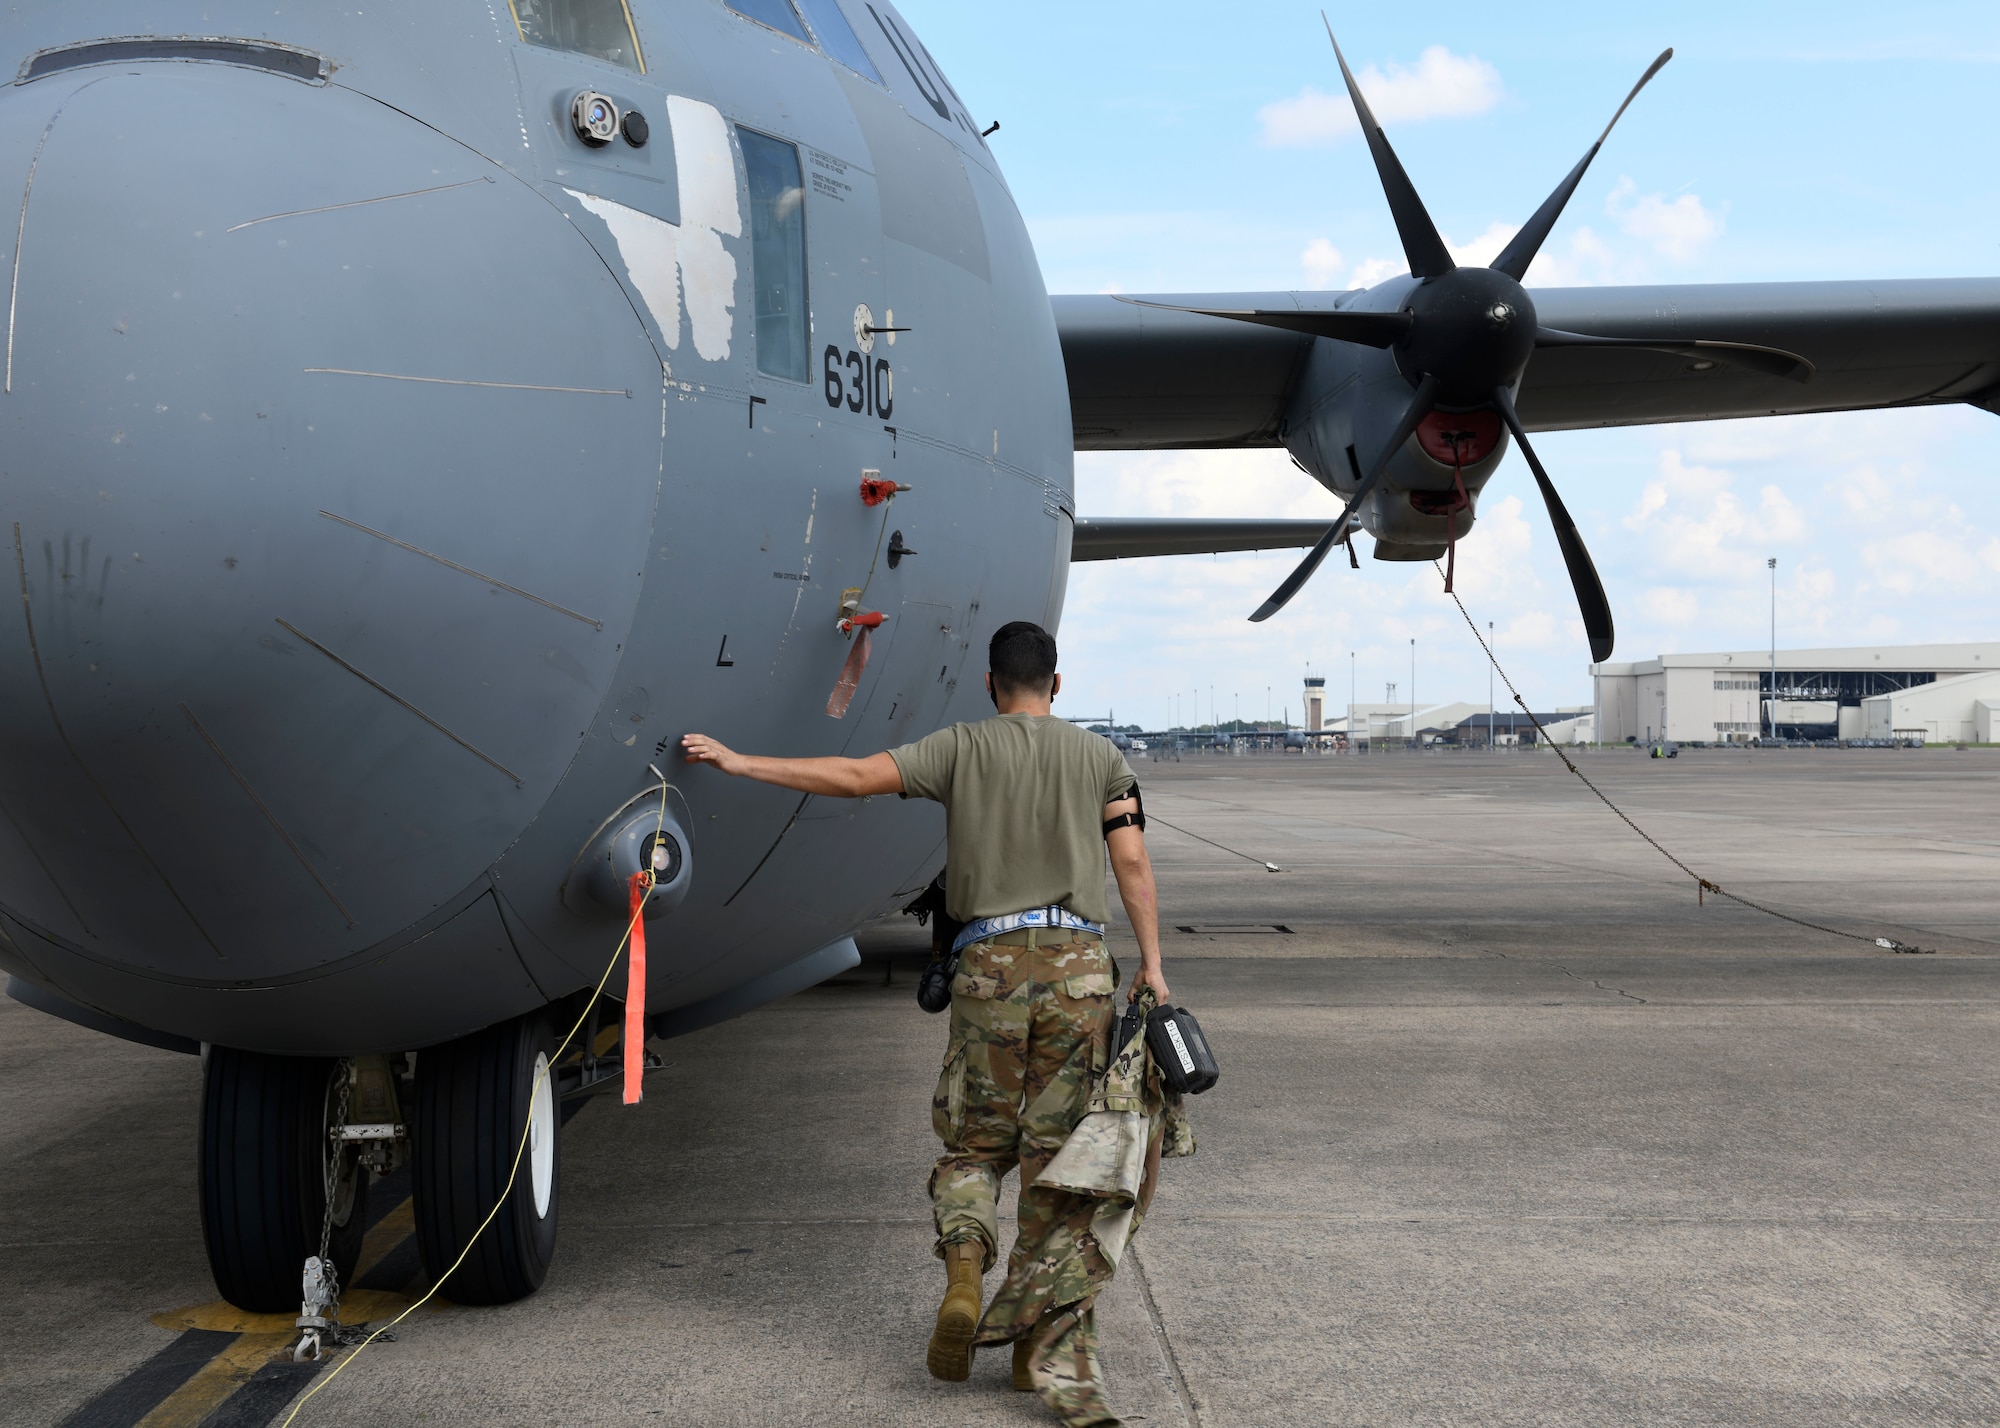 U.S. Air Force Reserve Airman 1st Class Micco Moore, 913th Aircraft Maintenance Squadron crew chief, touches the nose of a C-130J Super Hercules at Little Rock Air Force Base, Ark., Sept. 10, 2020.